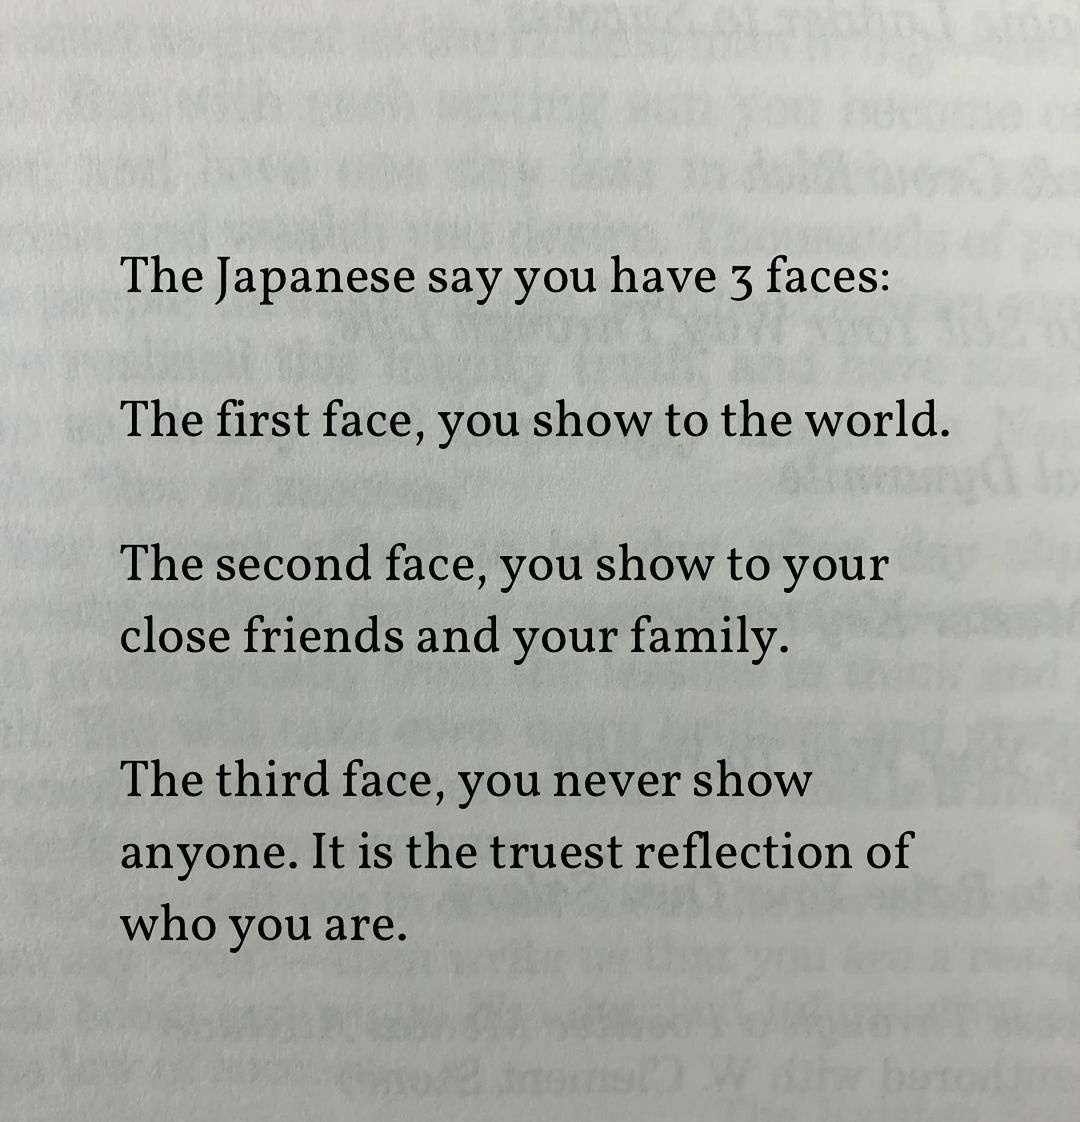 The Japanese say you have 3 faces: